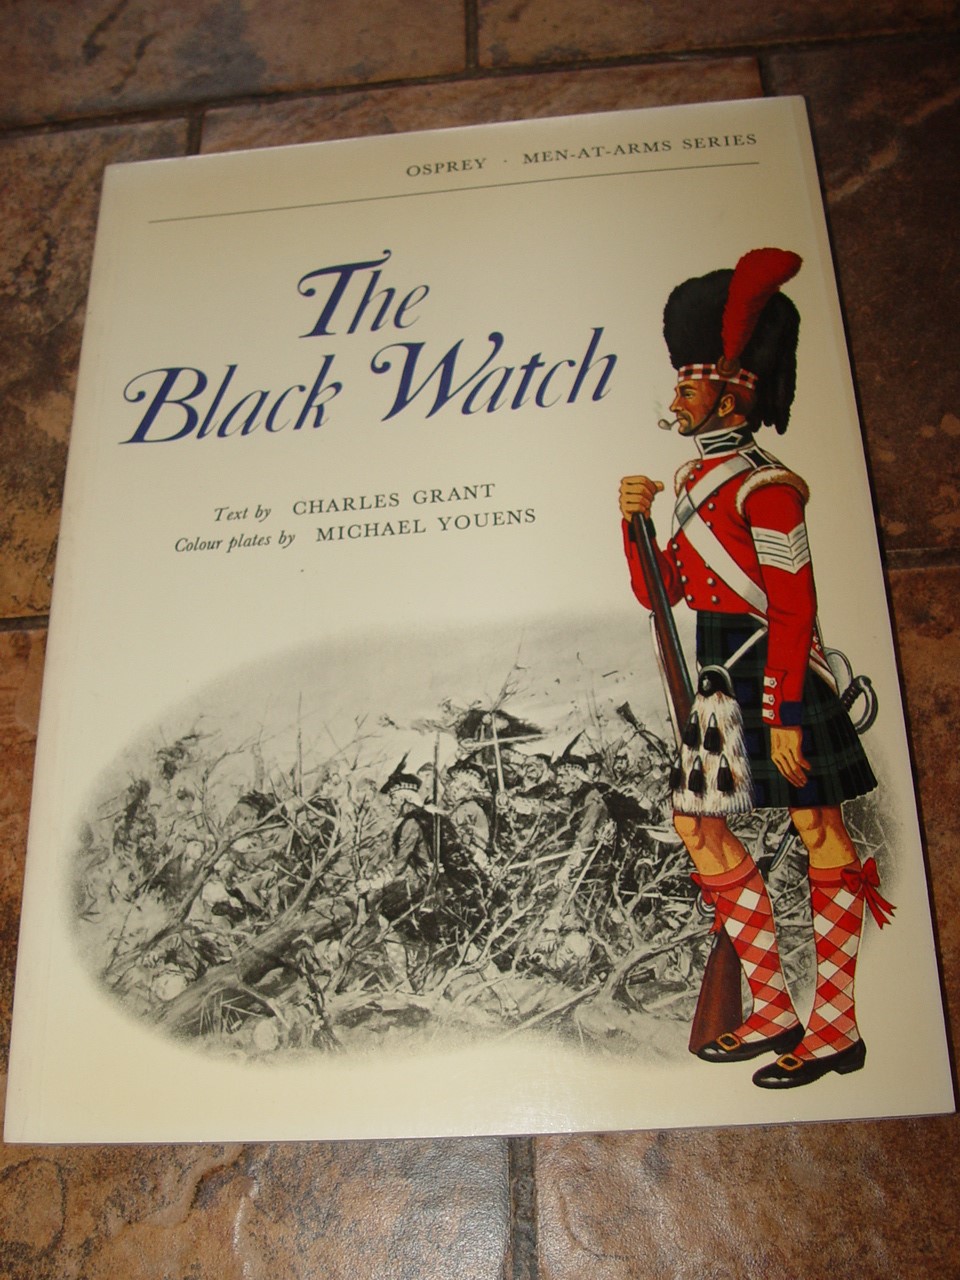 The Black Watch
                        by Charles Grant 1971 Men-At-Arms